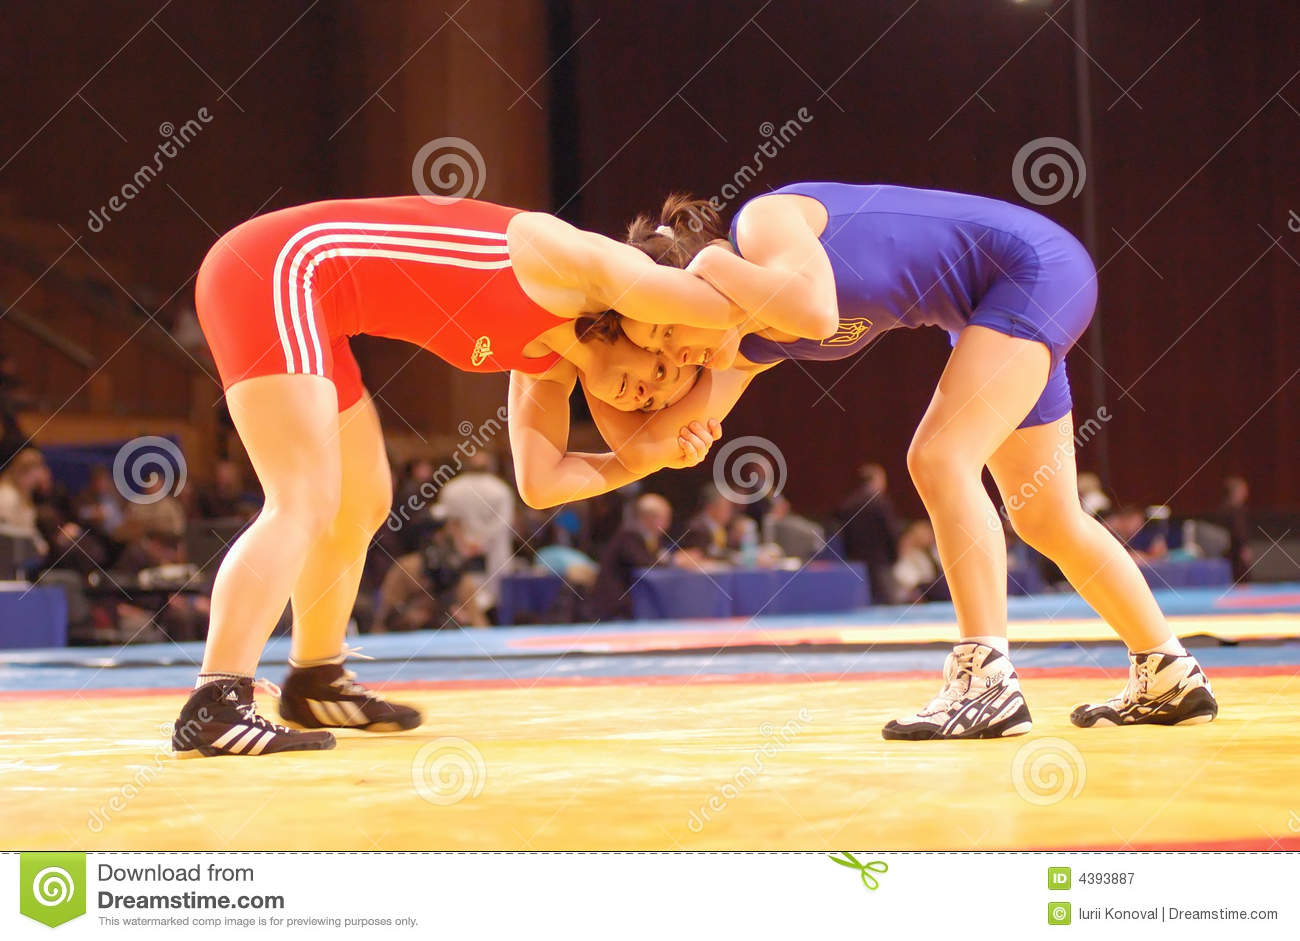 Wrestling Woman Editorial Photography   Image  4393887